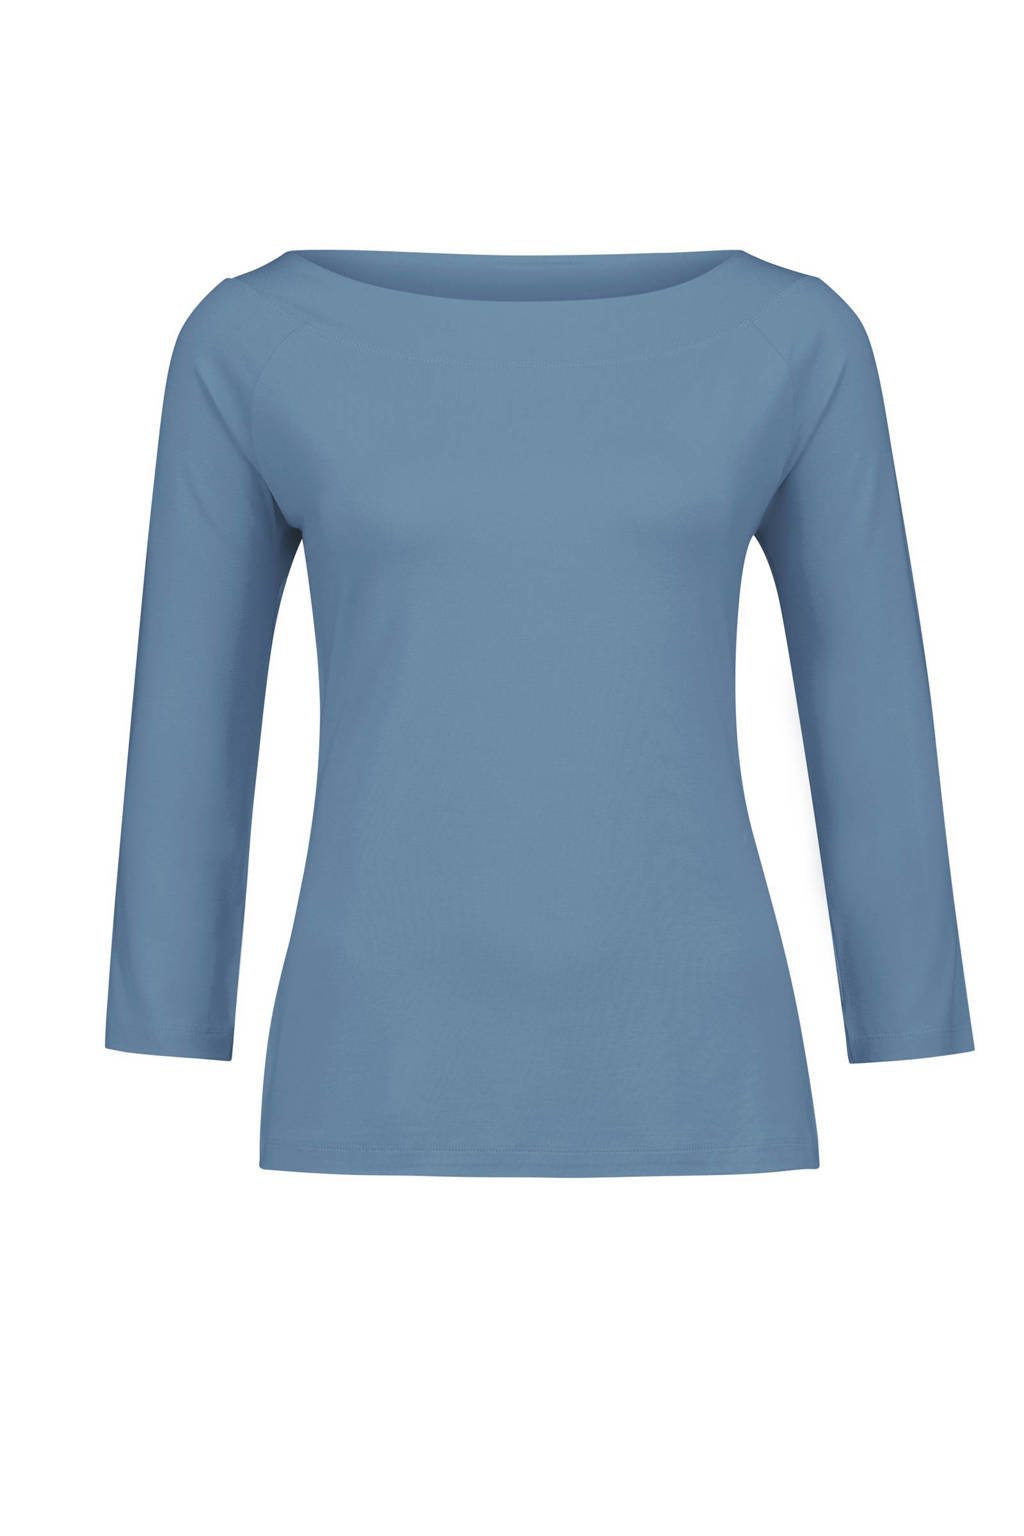 Claudia Sträter jersey top boothals 3/4 mouw blauw